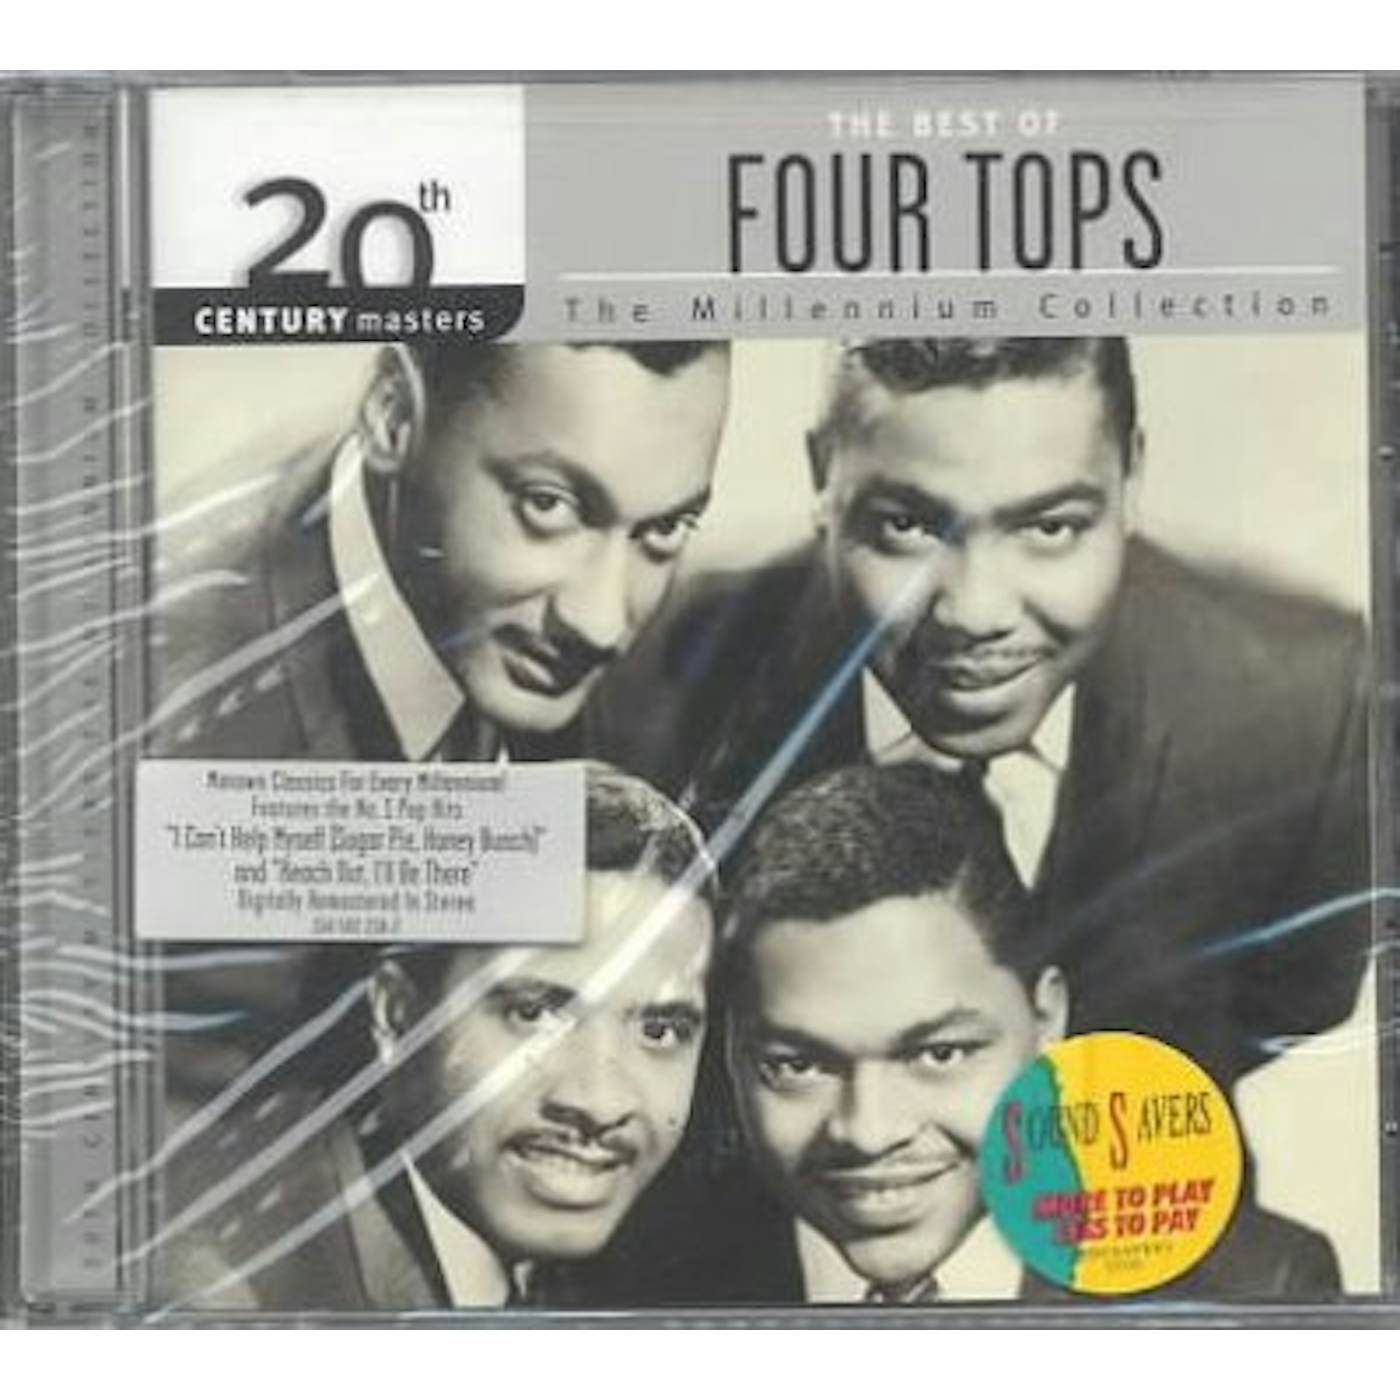 Four Tops MILLENNIUM COLLECTION: 20TH CENTURY MASTERS CD